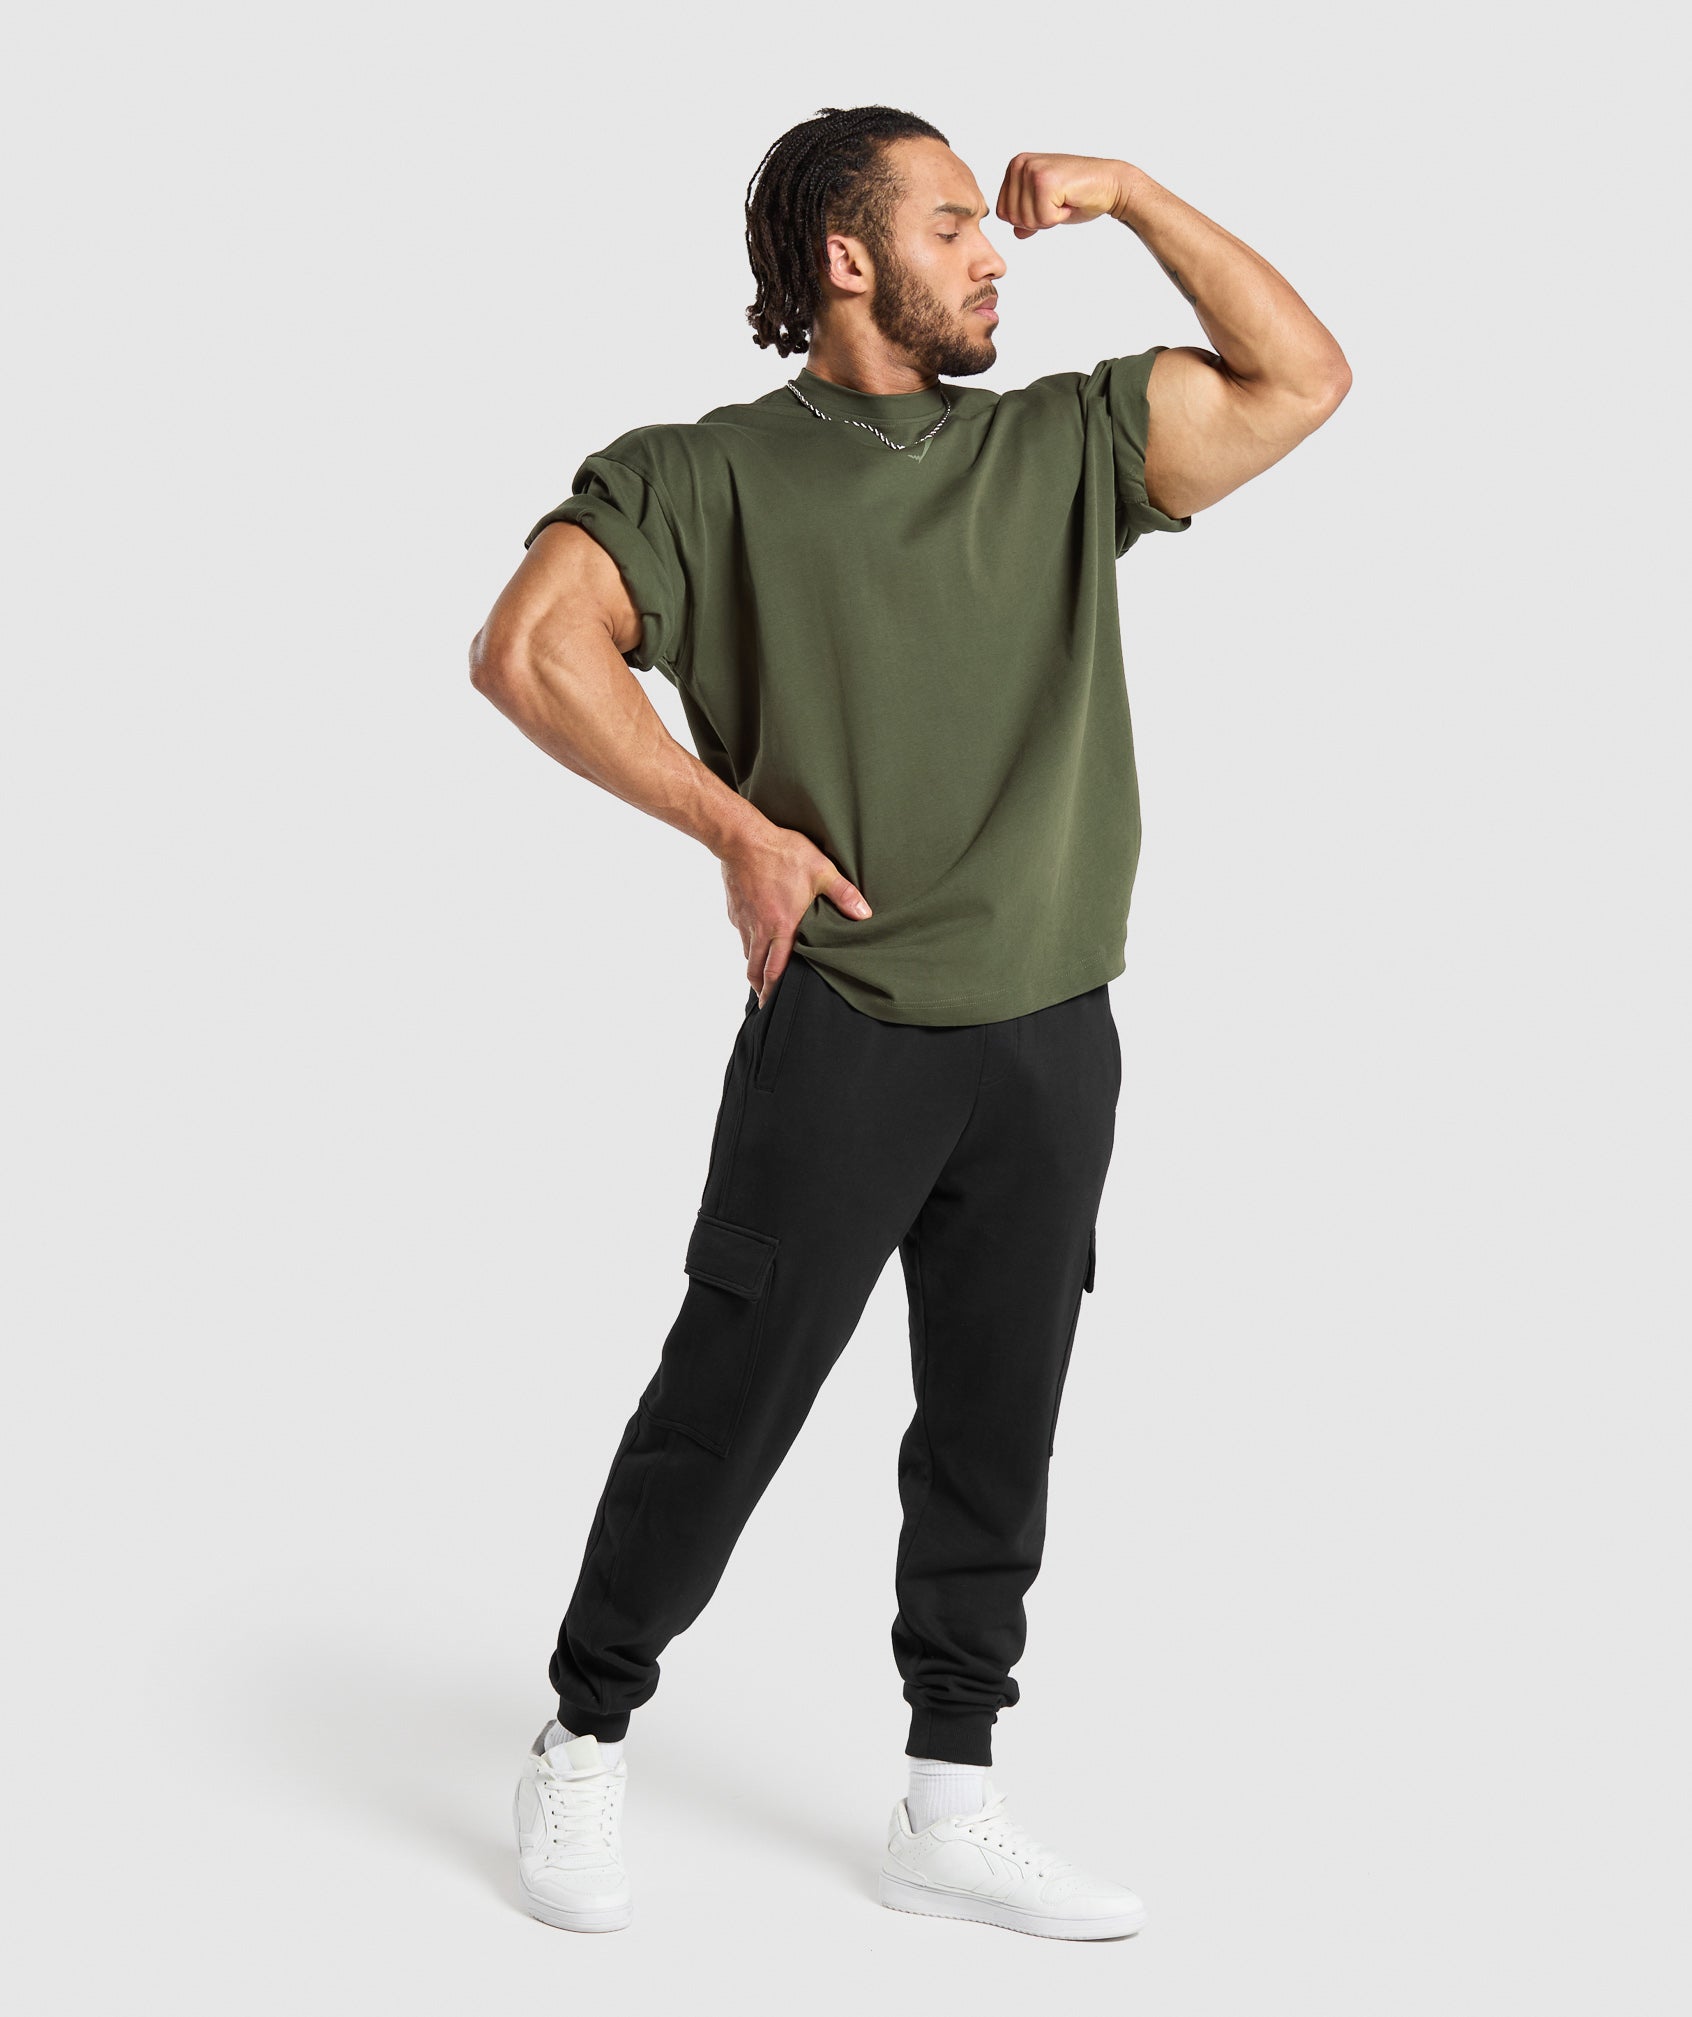 Sets N Reps T-Shirt in Winter Olive - view 4